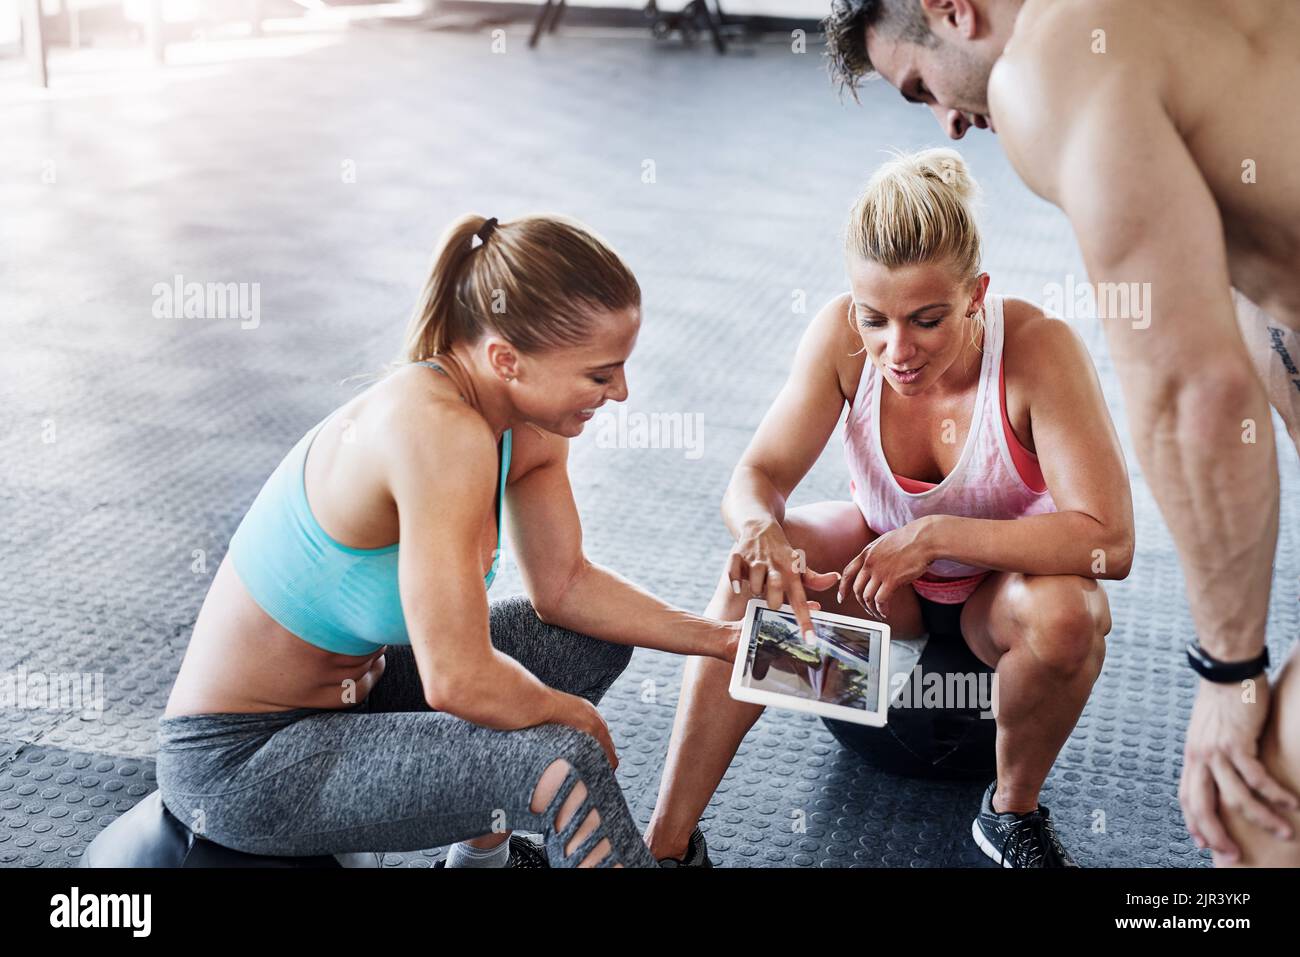 There are a multitude of fitness tutorials online. a group of people using a digital tablet at the gym. Stock Photo